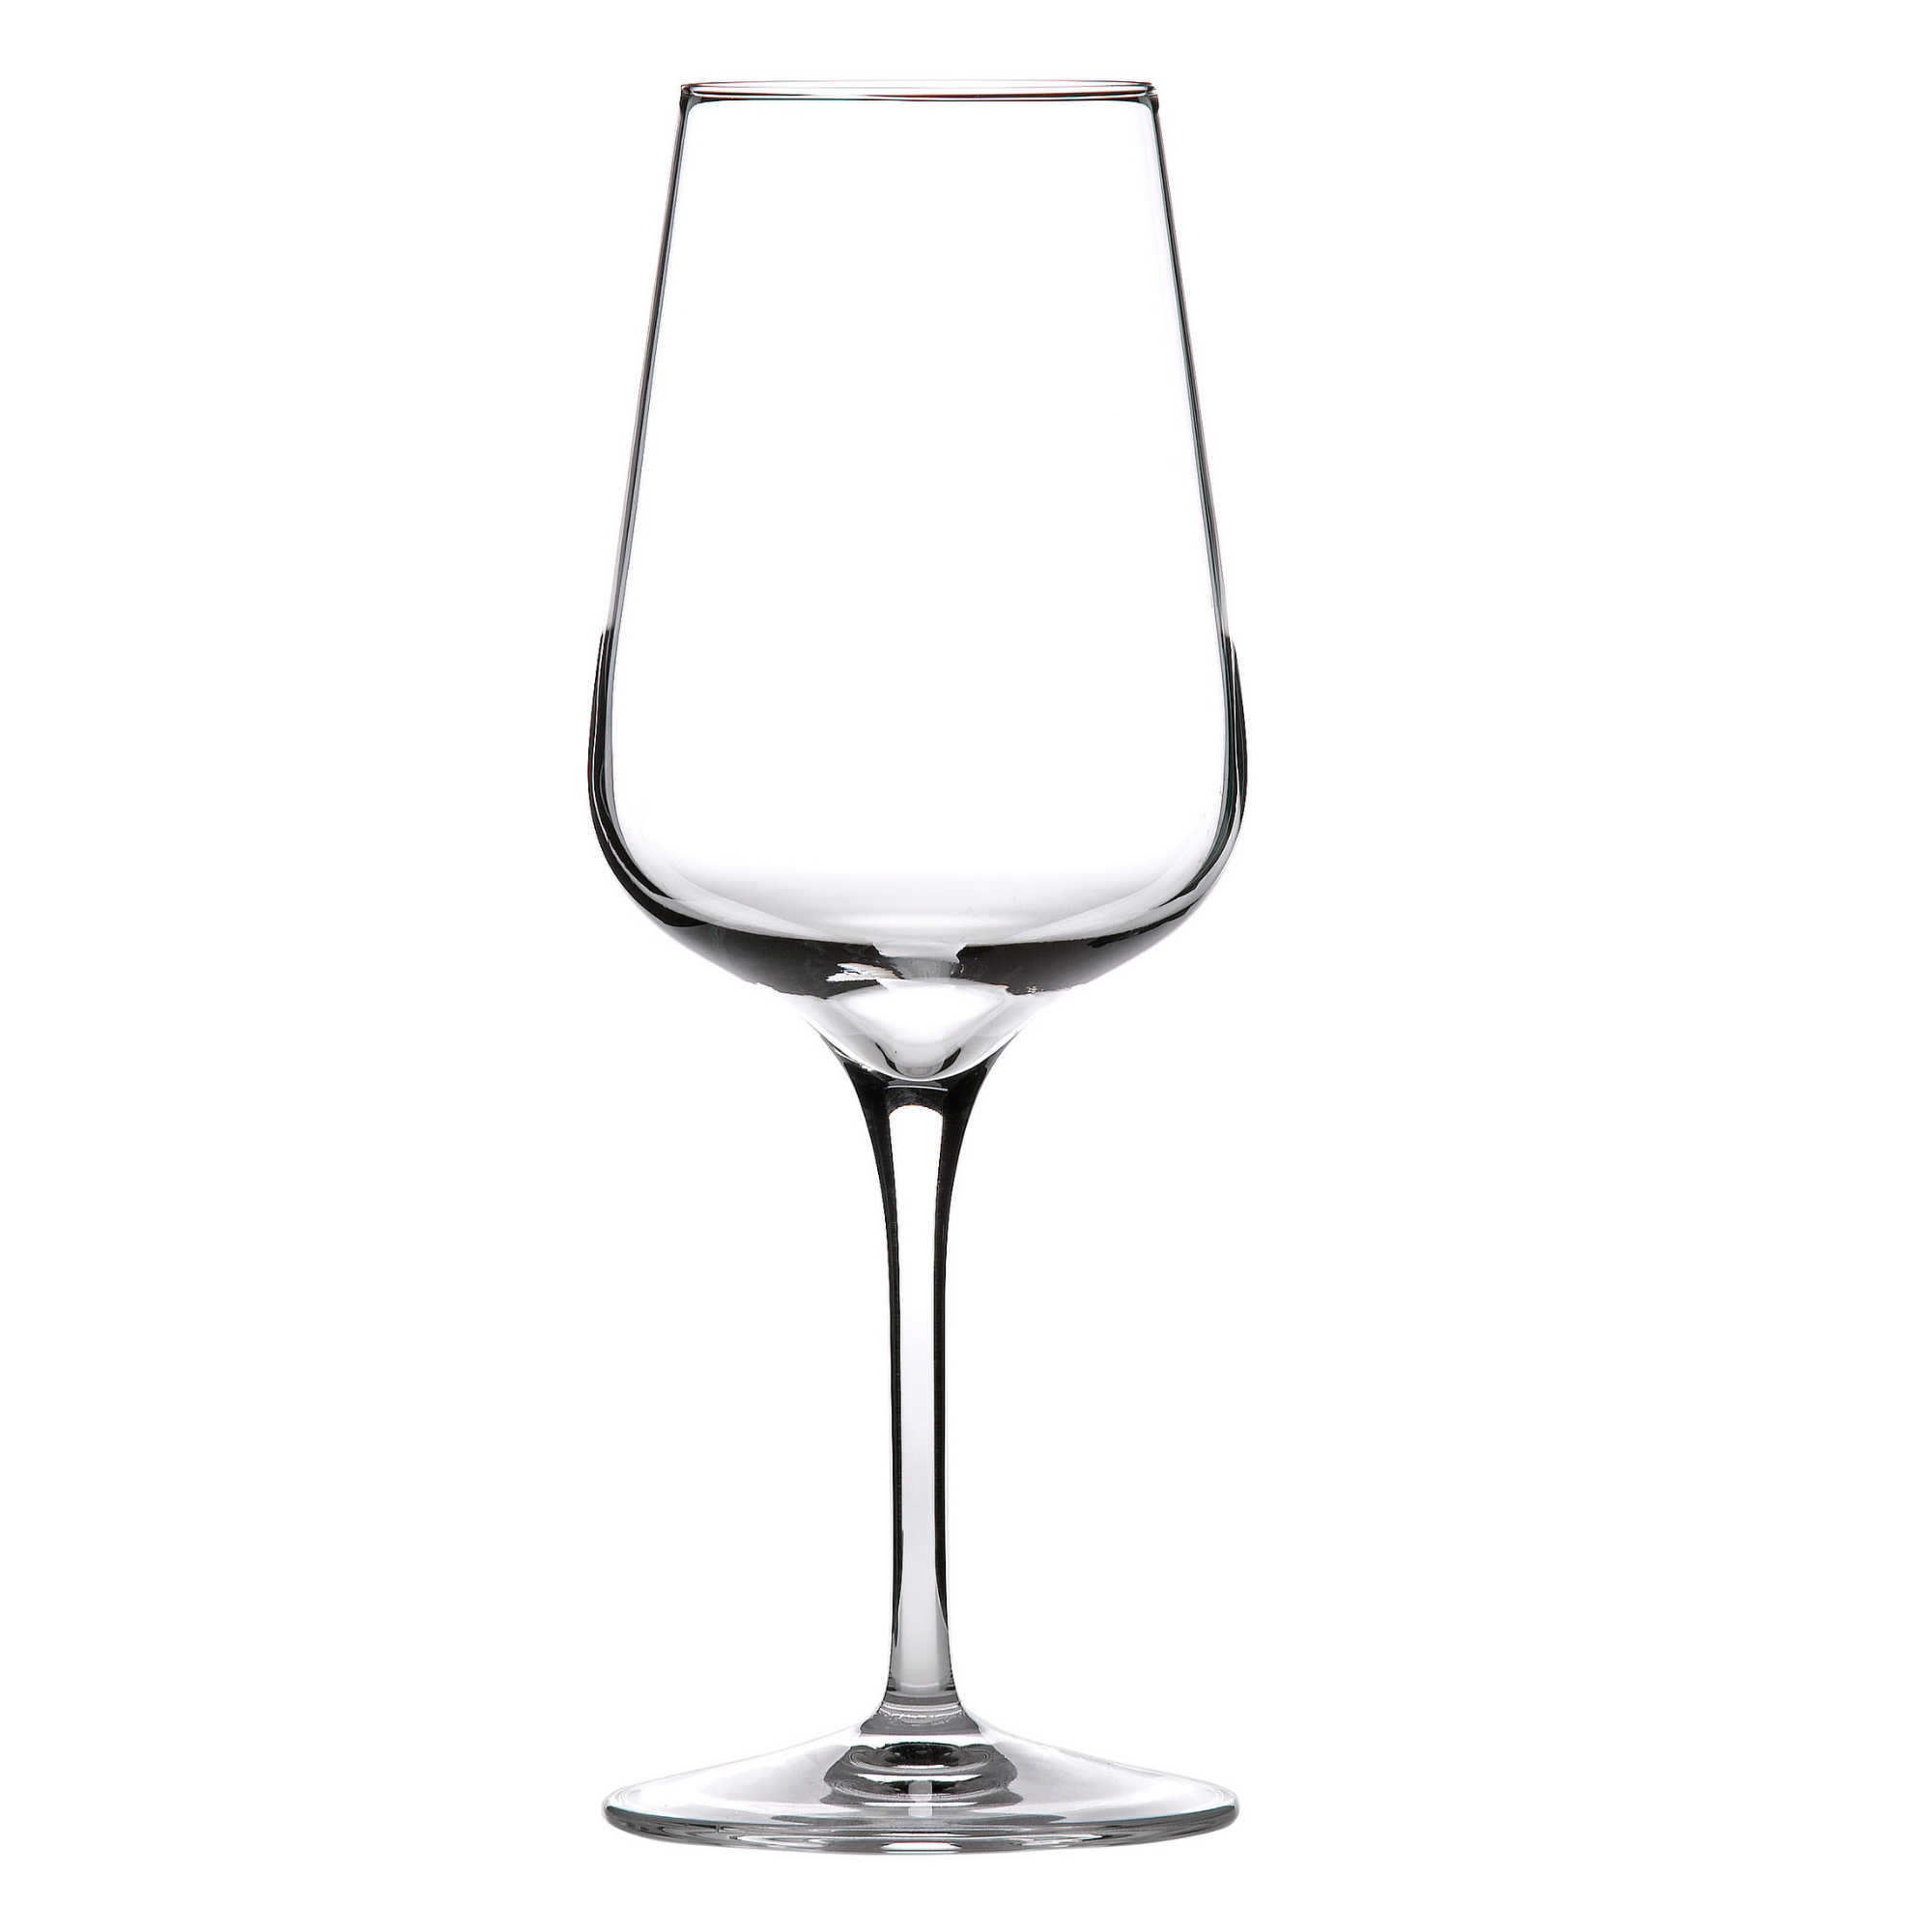 11.75 oz Drinking Glasses With Multicolored Base